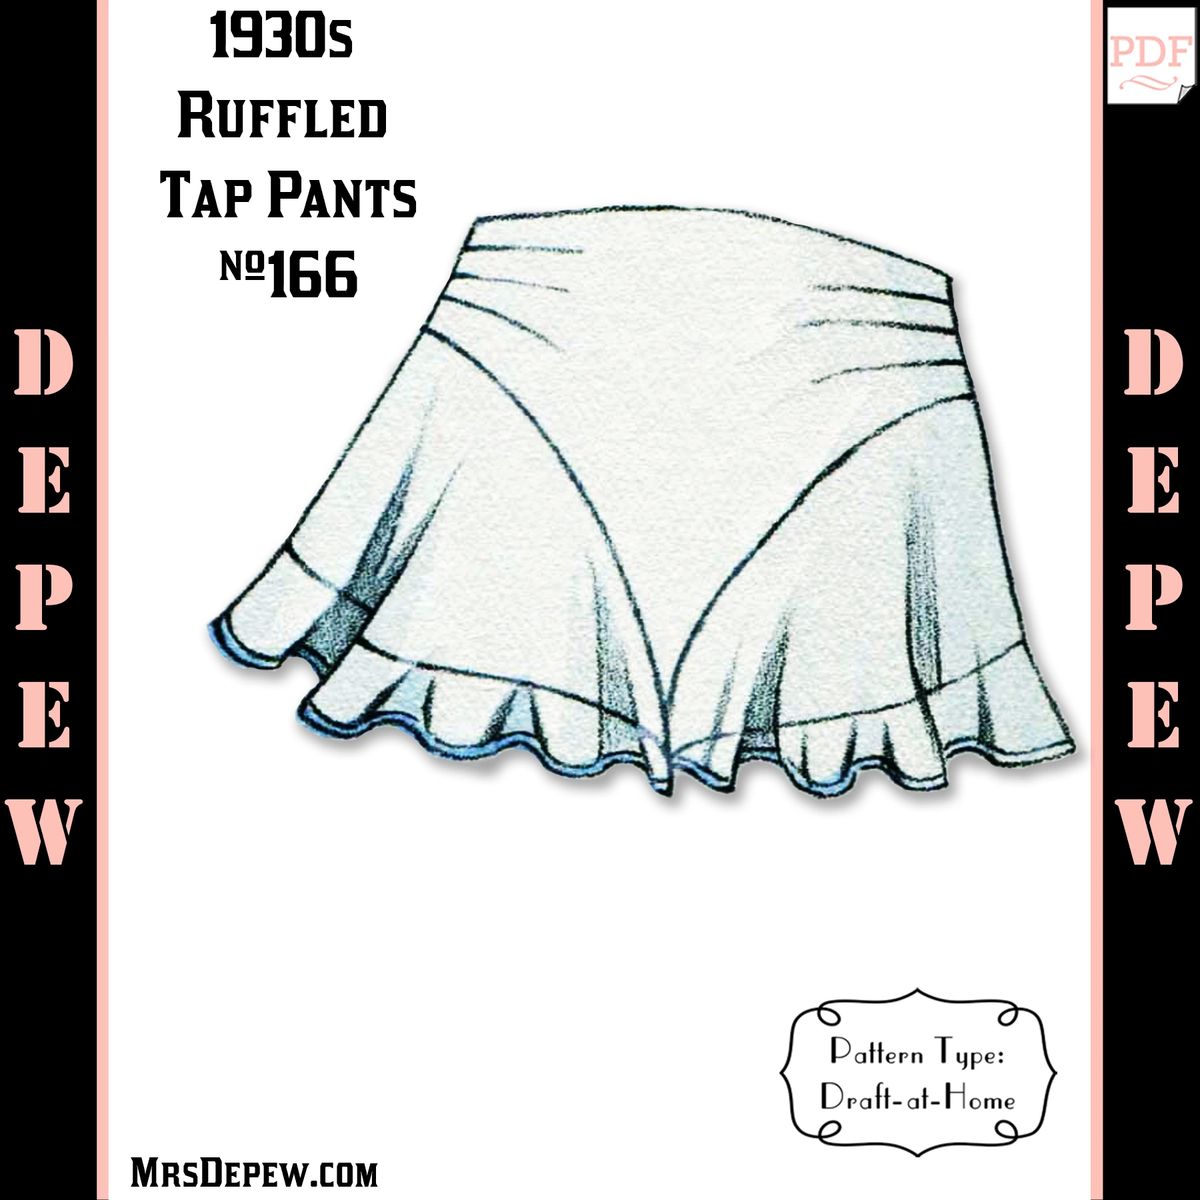 D-A-H Vintage Sewing Pattern 1930s French Ruffled Tap Pants in Any Size -  PLUS Size Included -166